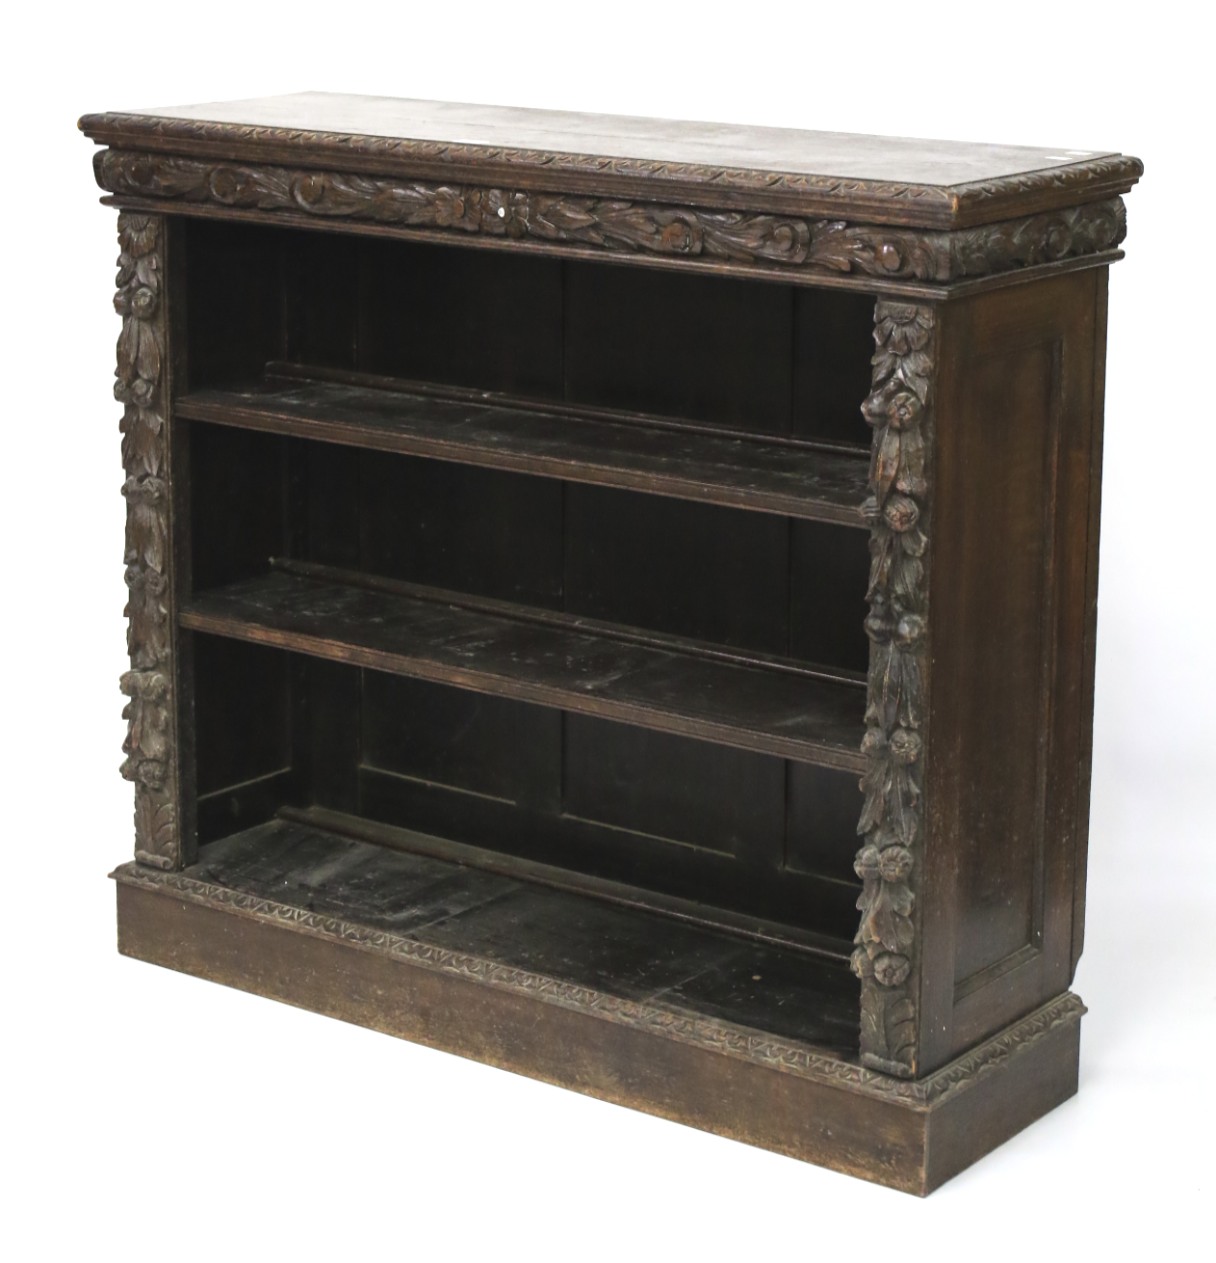 An early 20th century heavily carved oak Flemish style open bookcase.